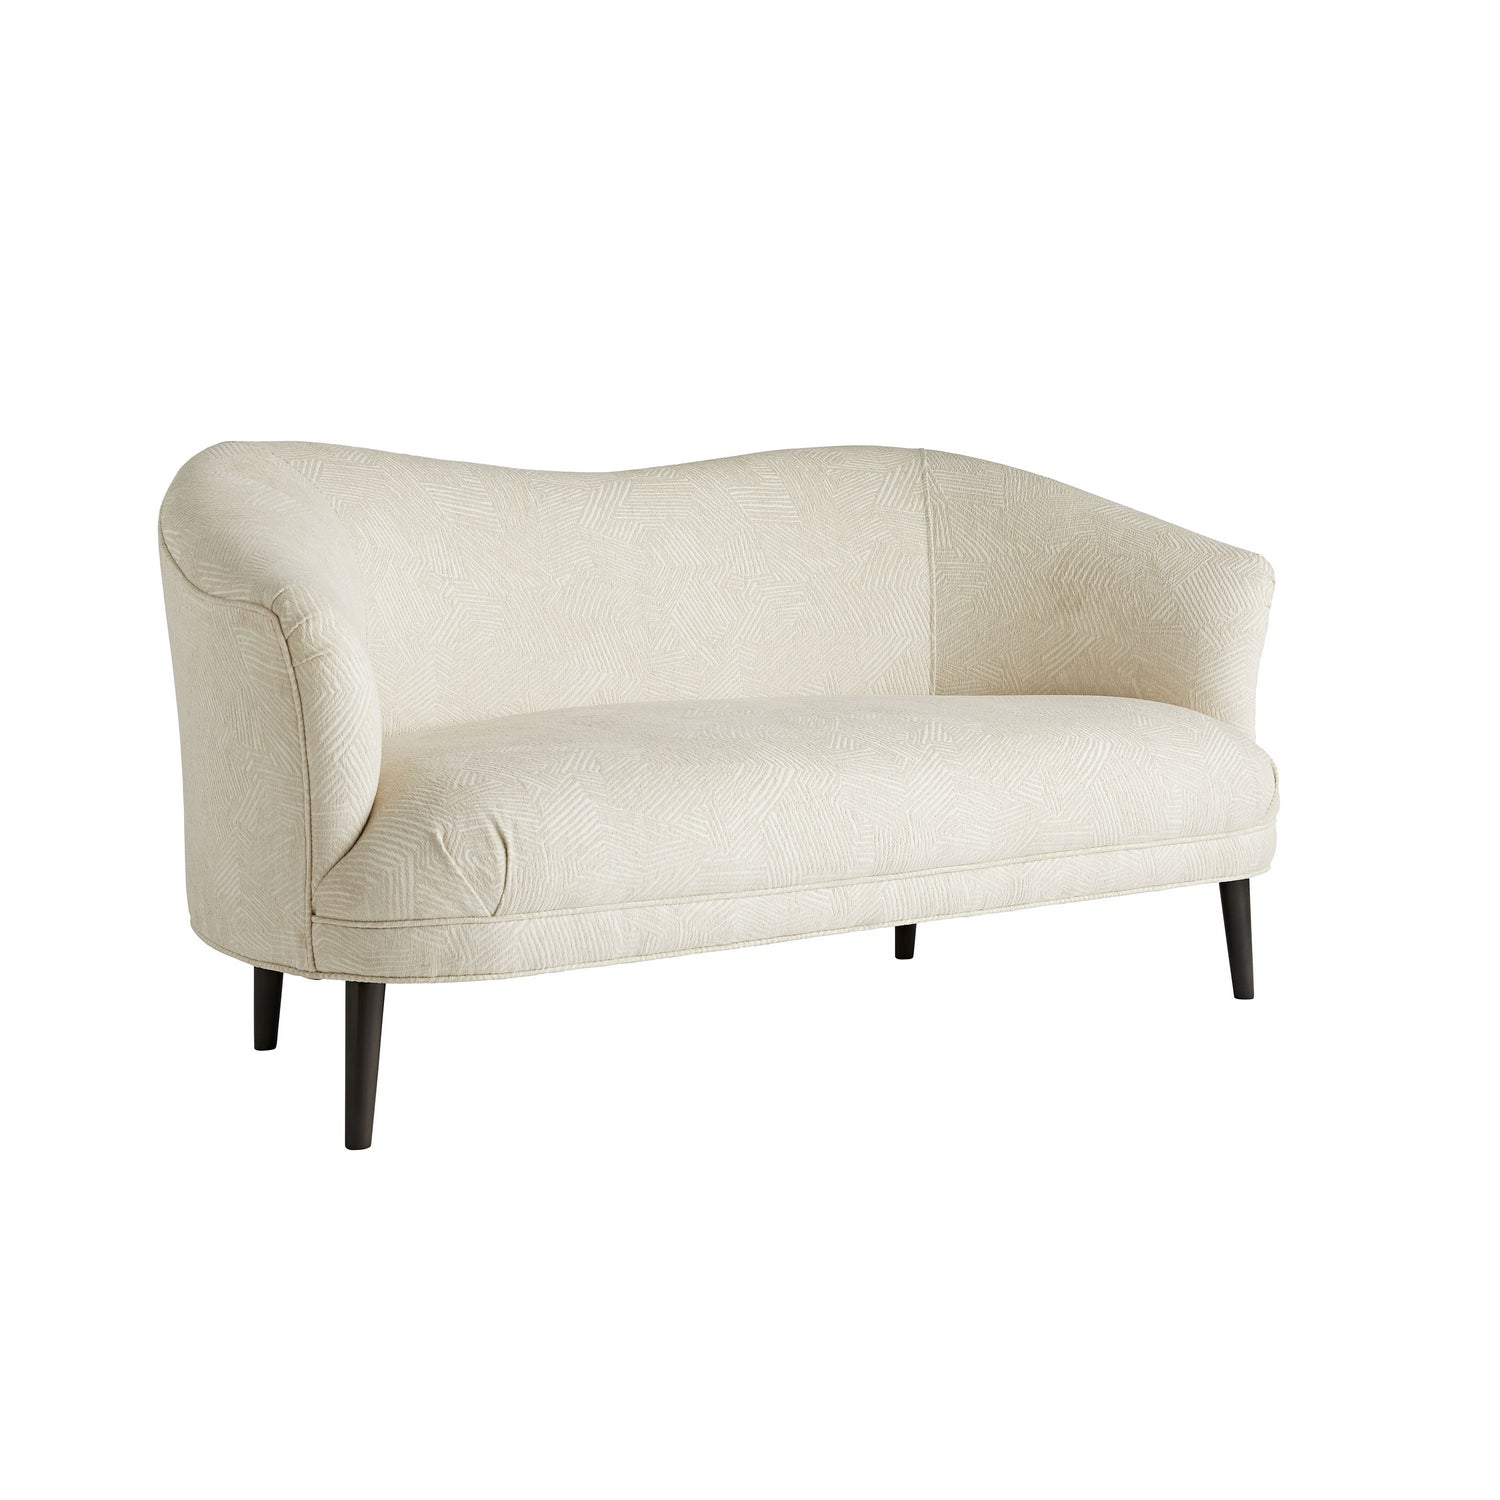 Settee from the Duprey collection in Textured Ivory finish